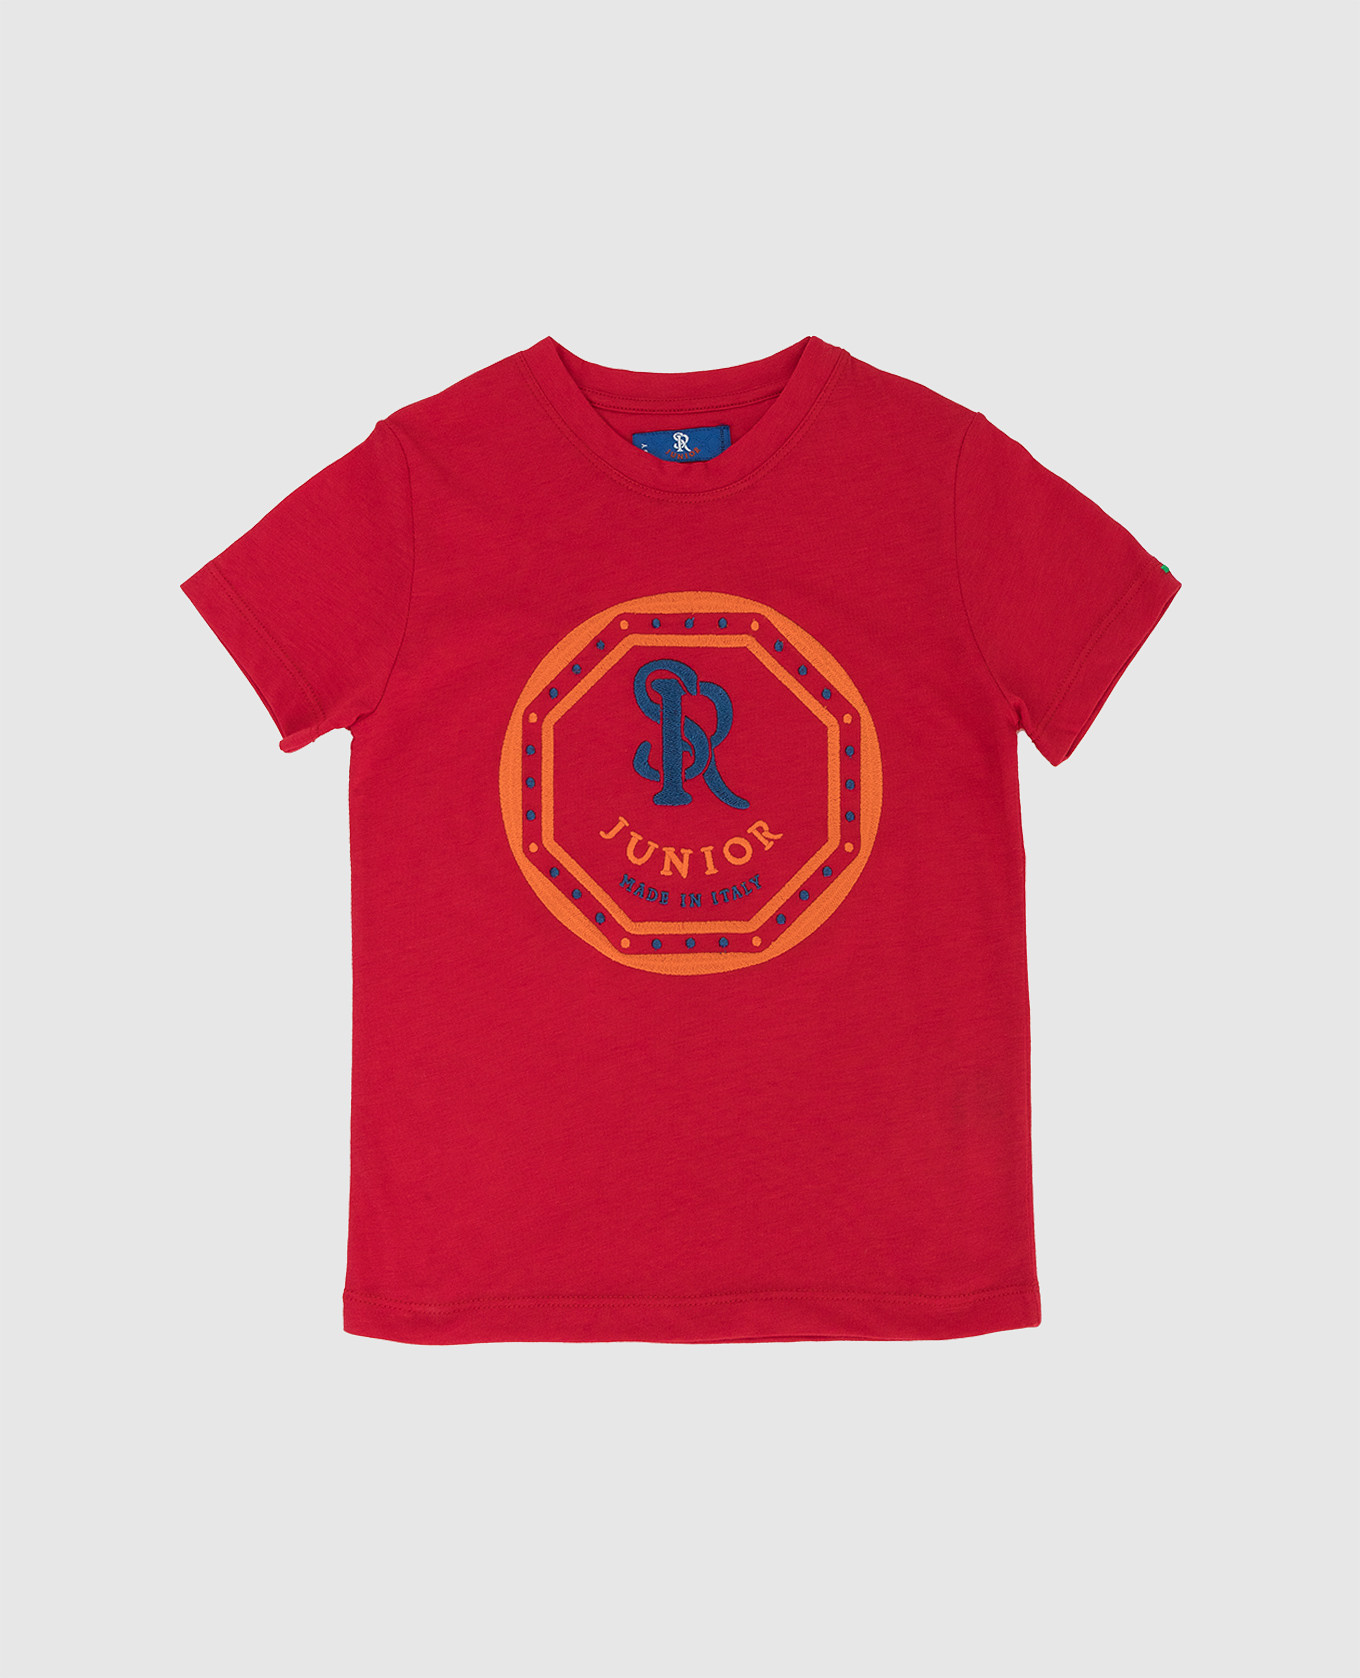 Children's red t-shirt with emblem embroidery